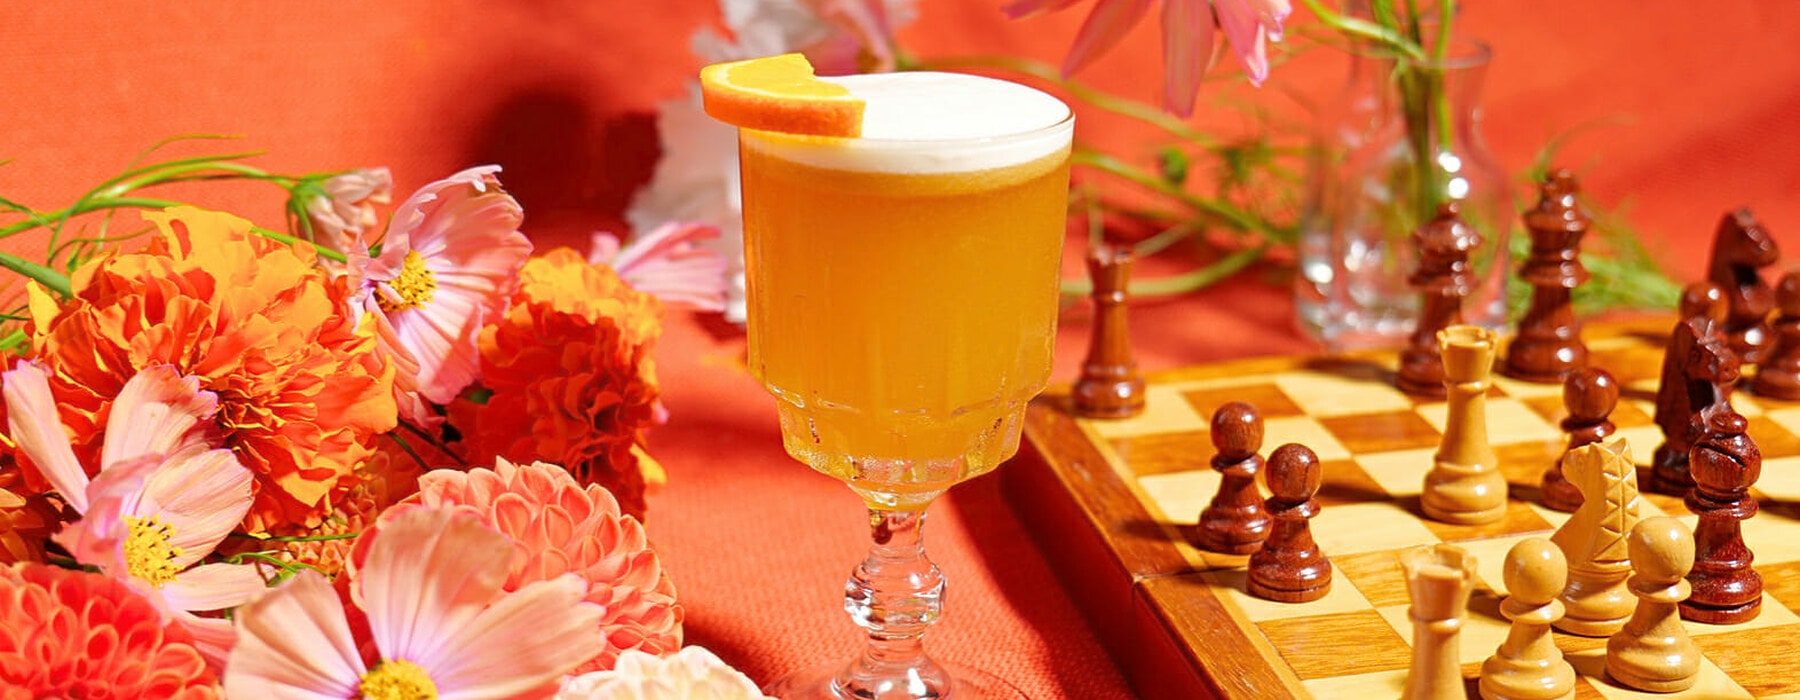 Orange rum cocktail with chessboard and flowers in front of orange backdrop